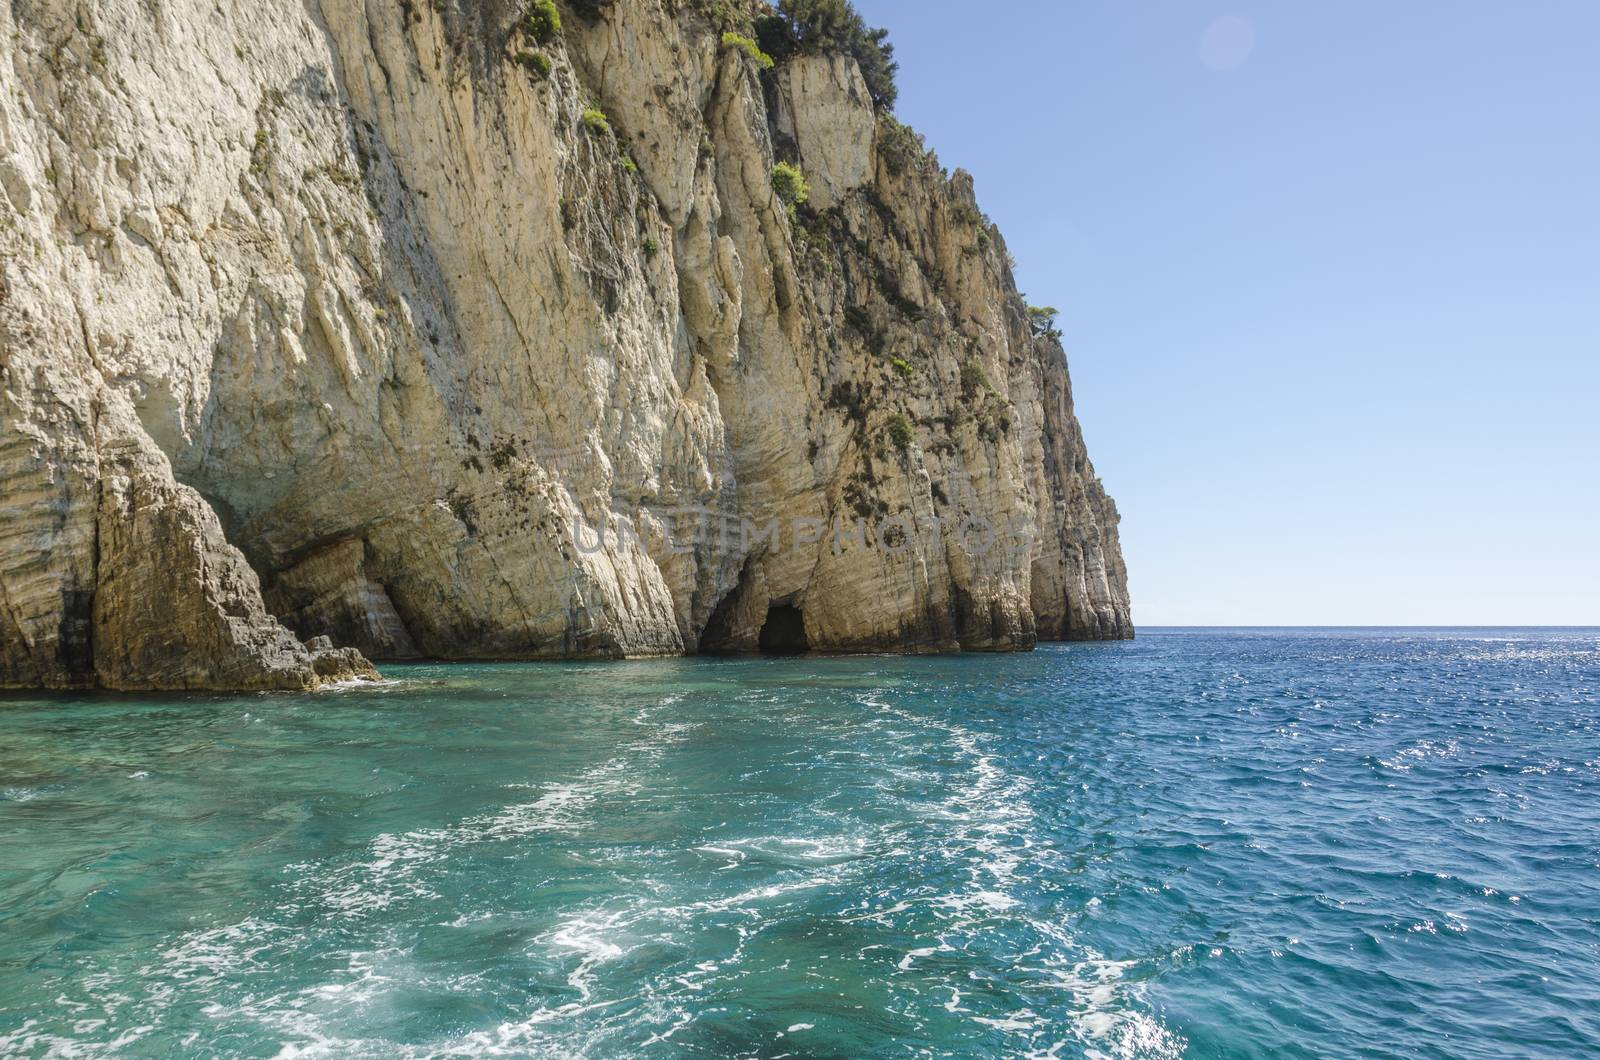 panoramic view of the reefs with their maritime caves in the waters of the Ionian sea on the shores of the island of zakynthos